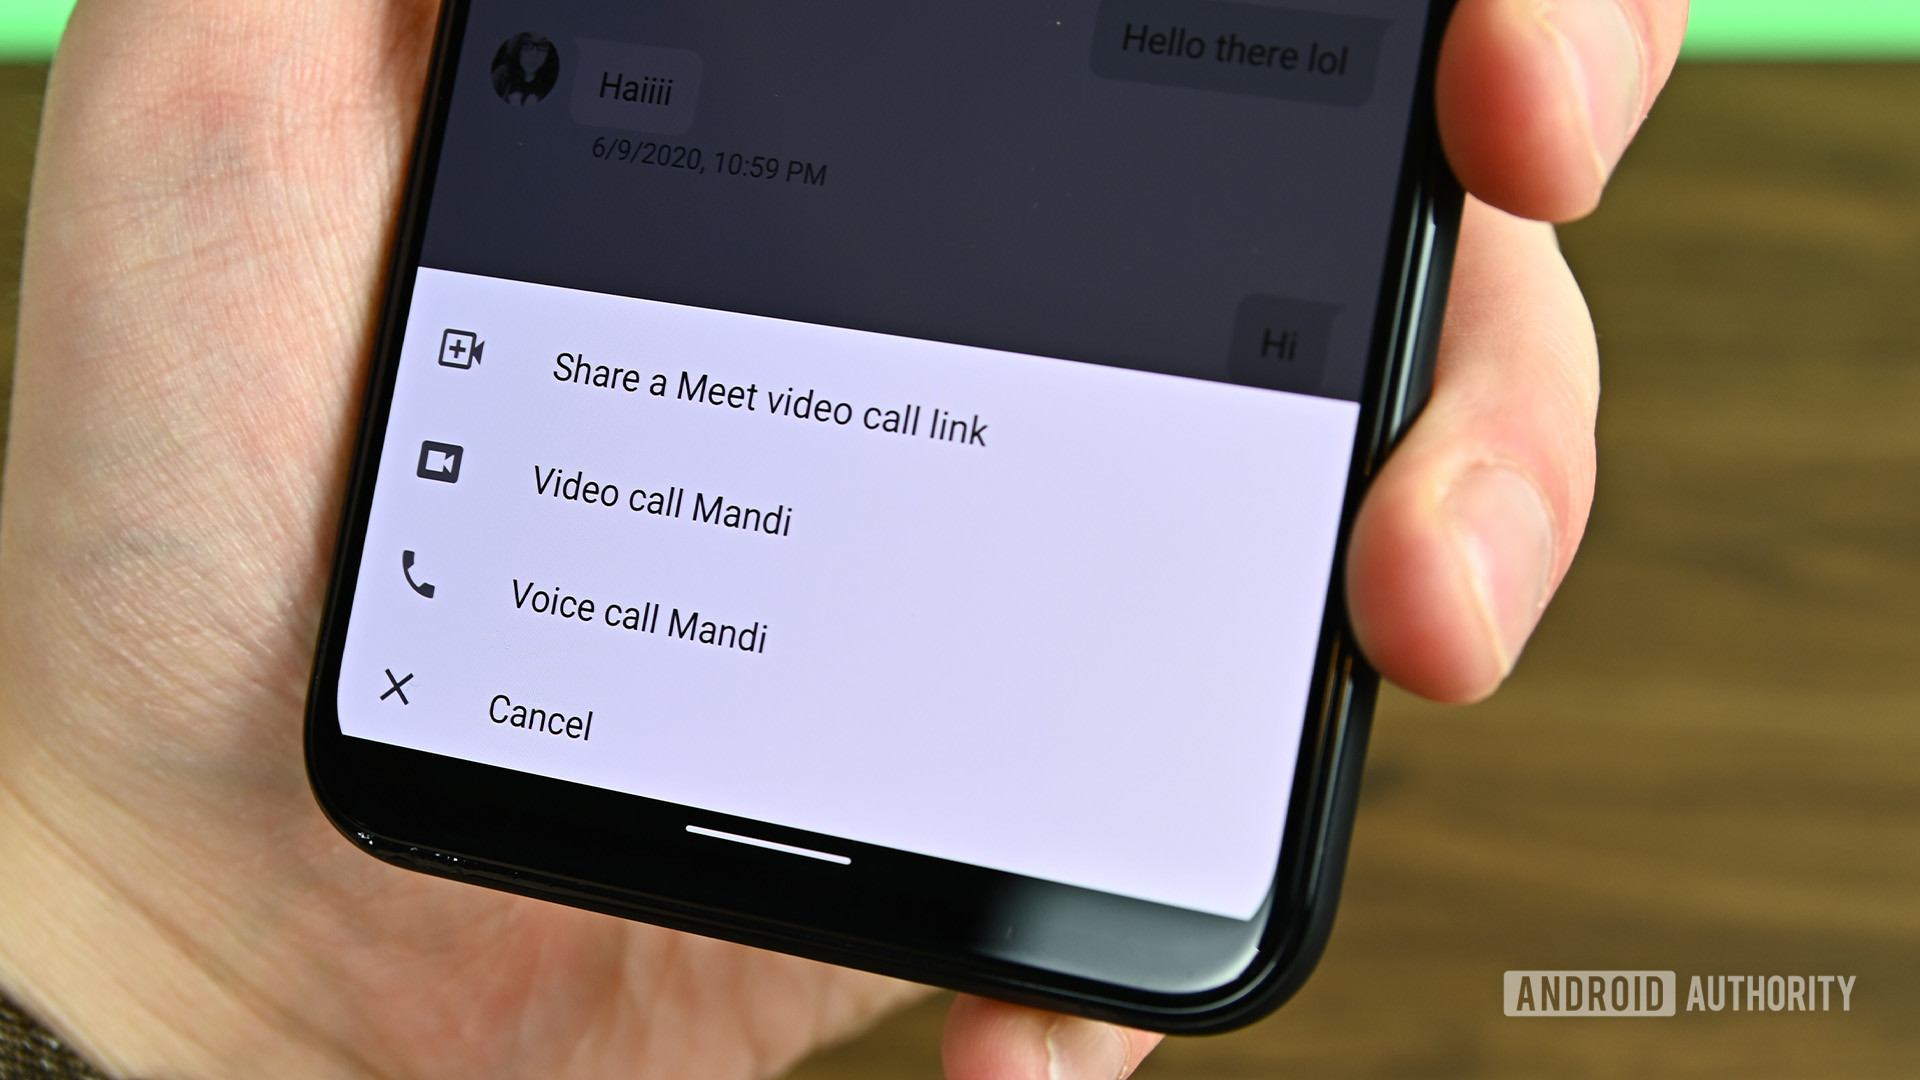 Google Hangouts Video or Voice call.